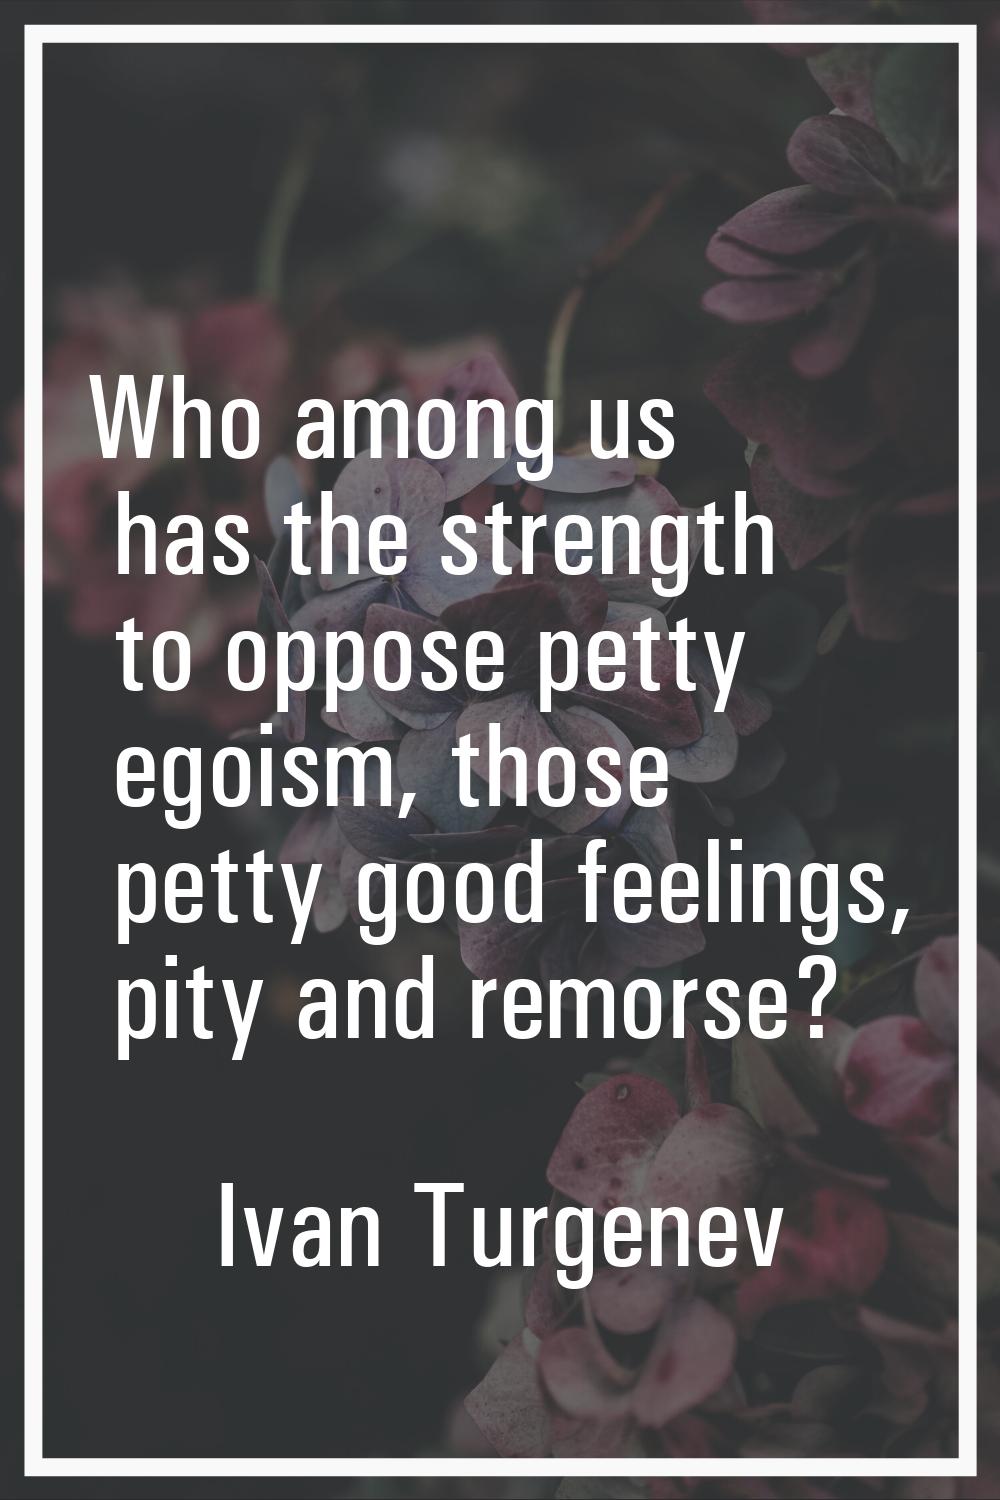 Who among us has the strength to oppose petty egoism, those petty good feelings, pity and remorse?